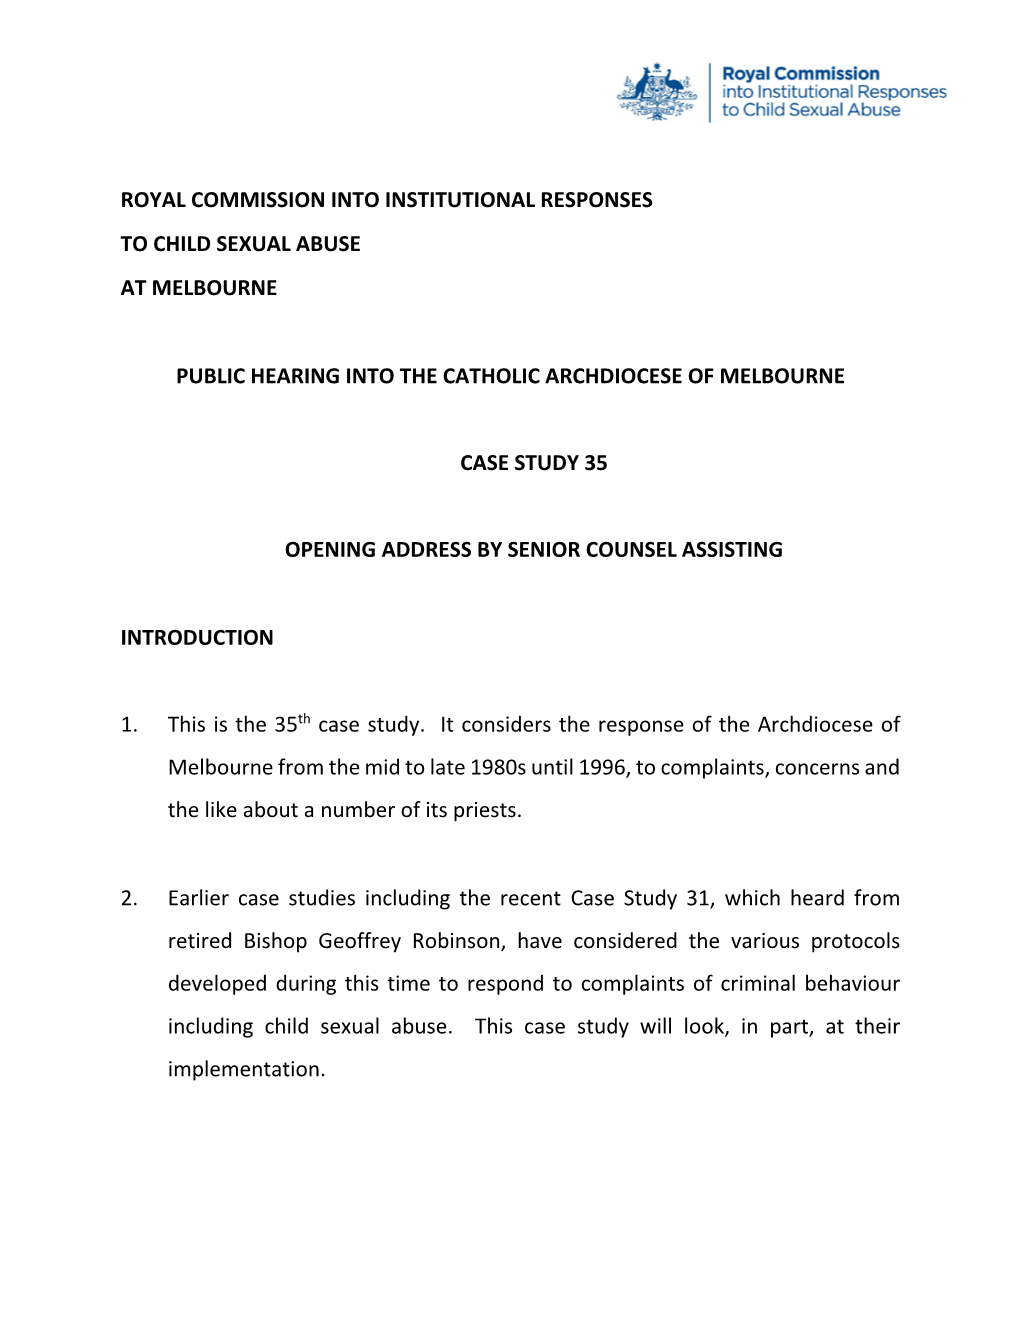 Royal Commission Into Institutional Responses to Child Sexual Abuse at Melbourne